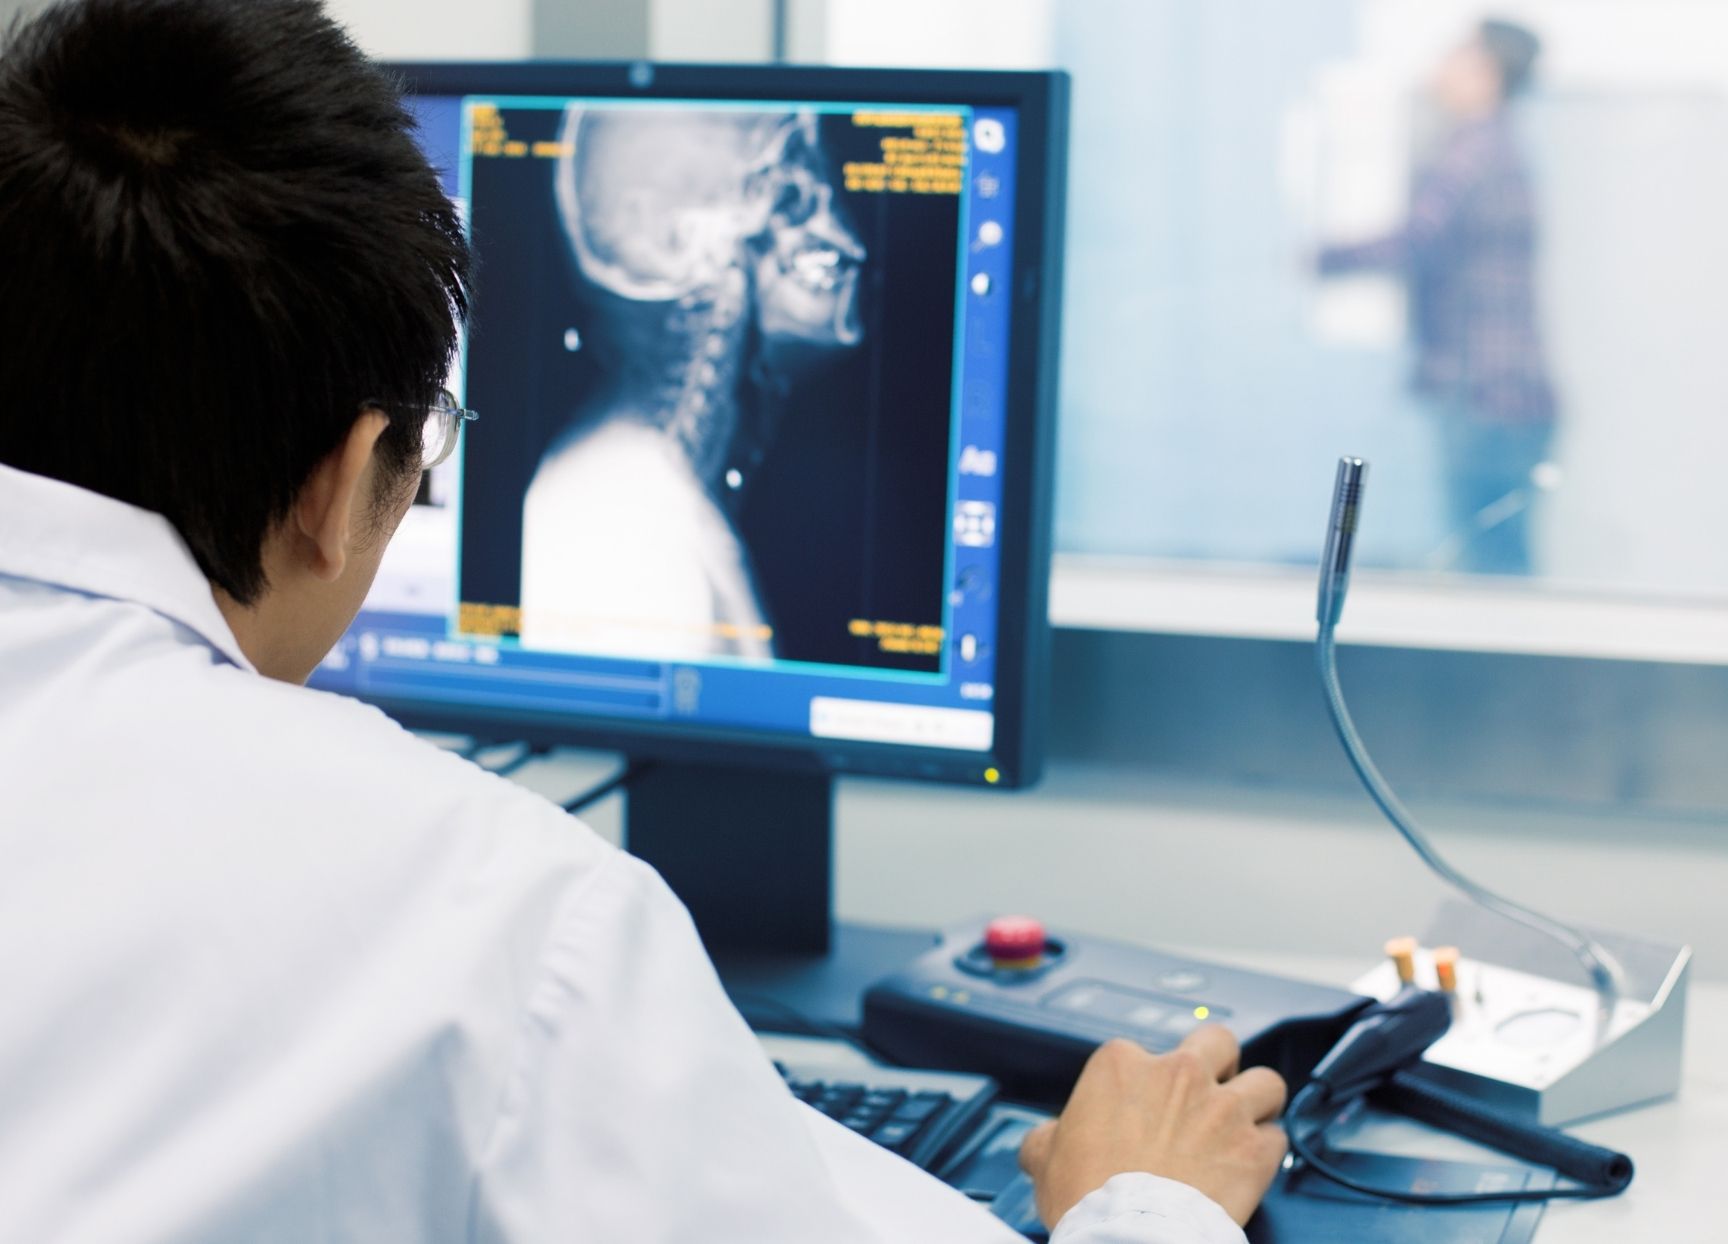 Radiography vs radiology – what is the difference? | News | OneWelbeck  Imaging & Diagnostics